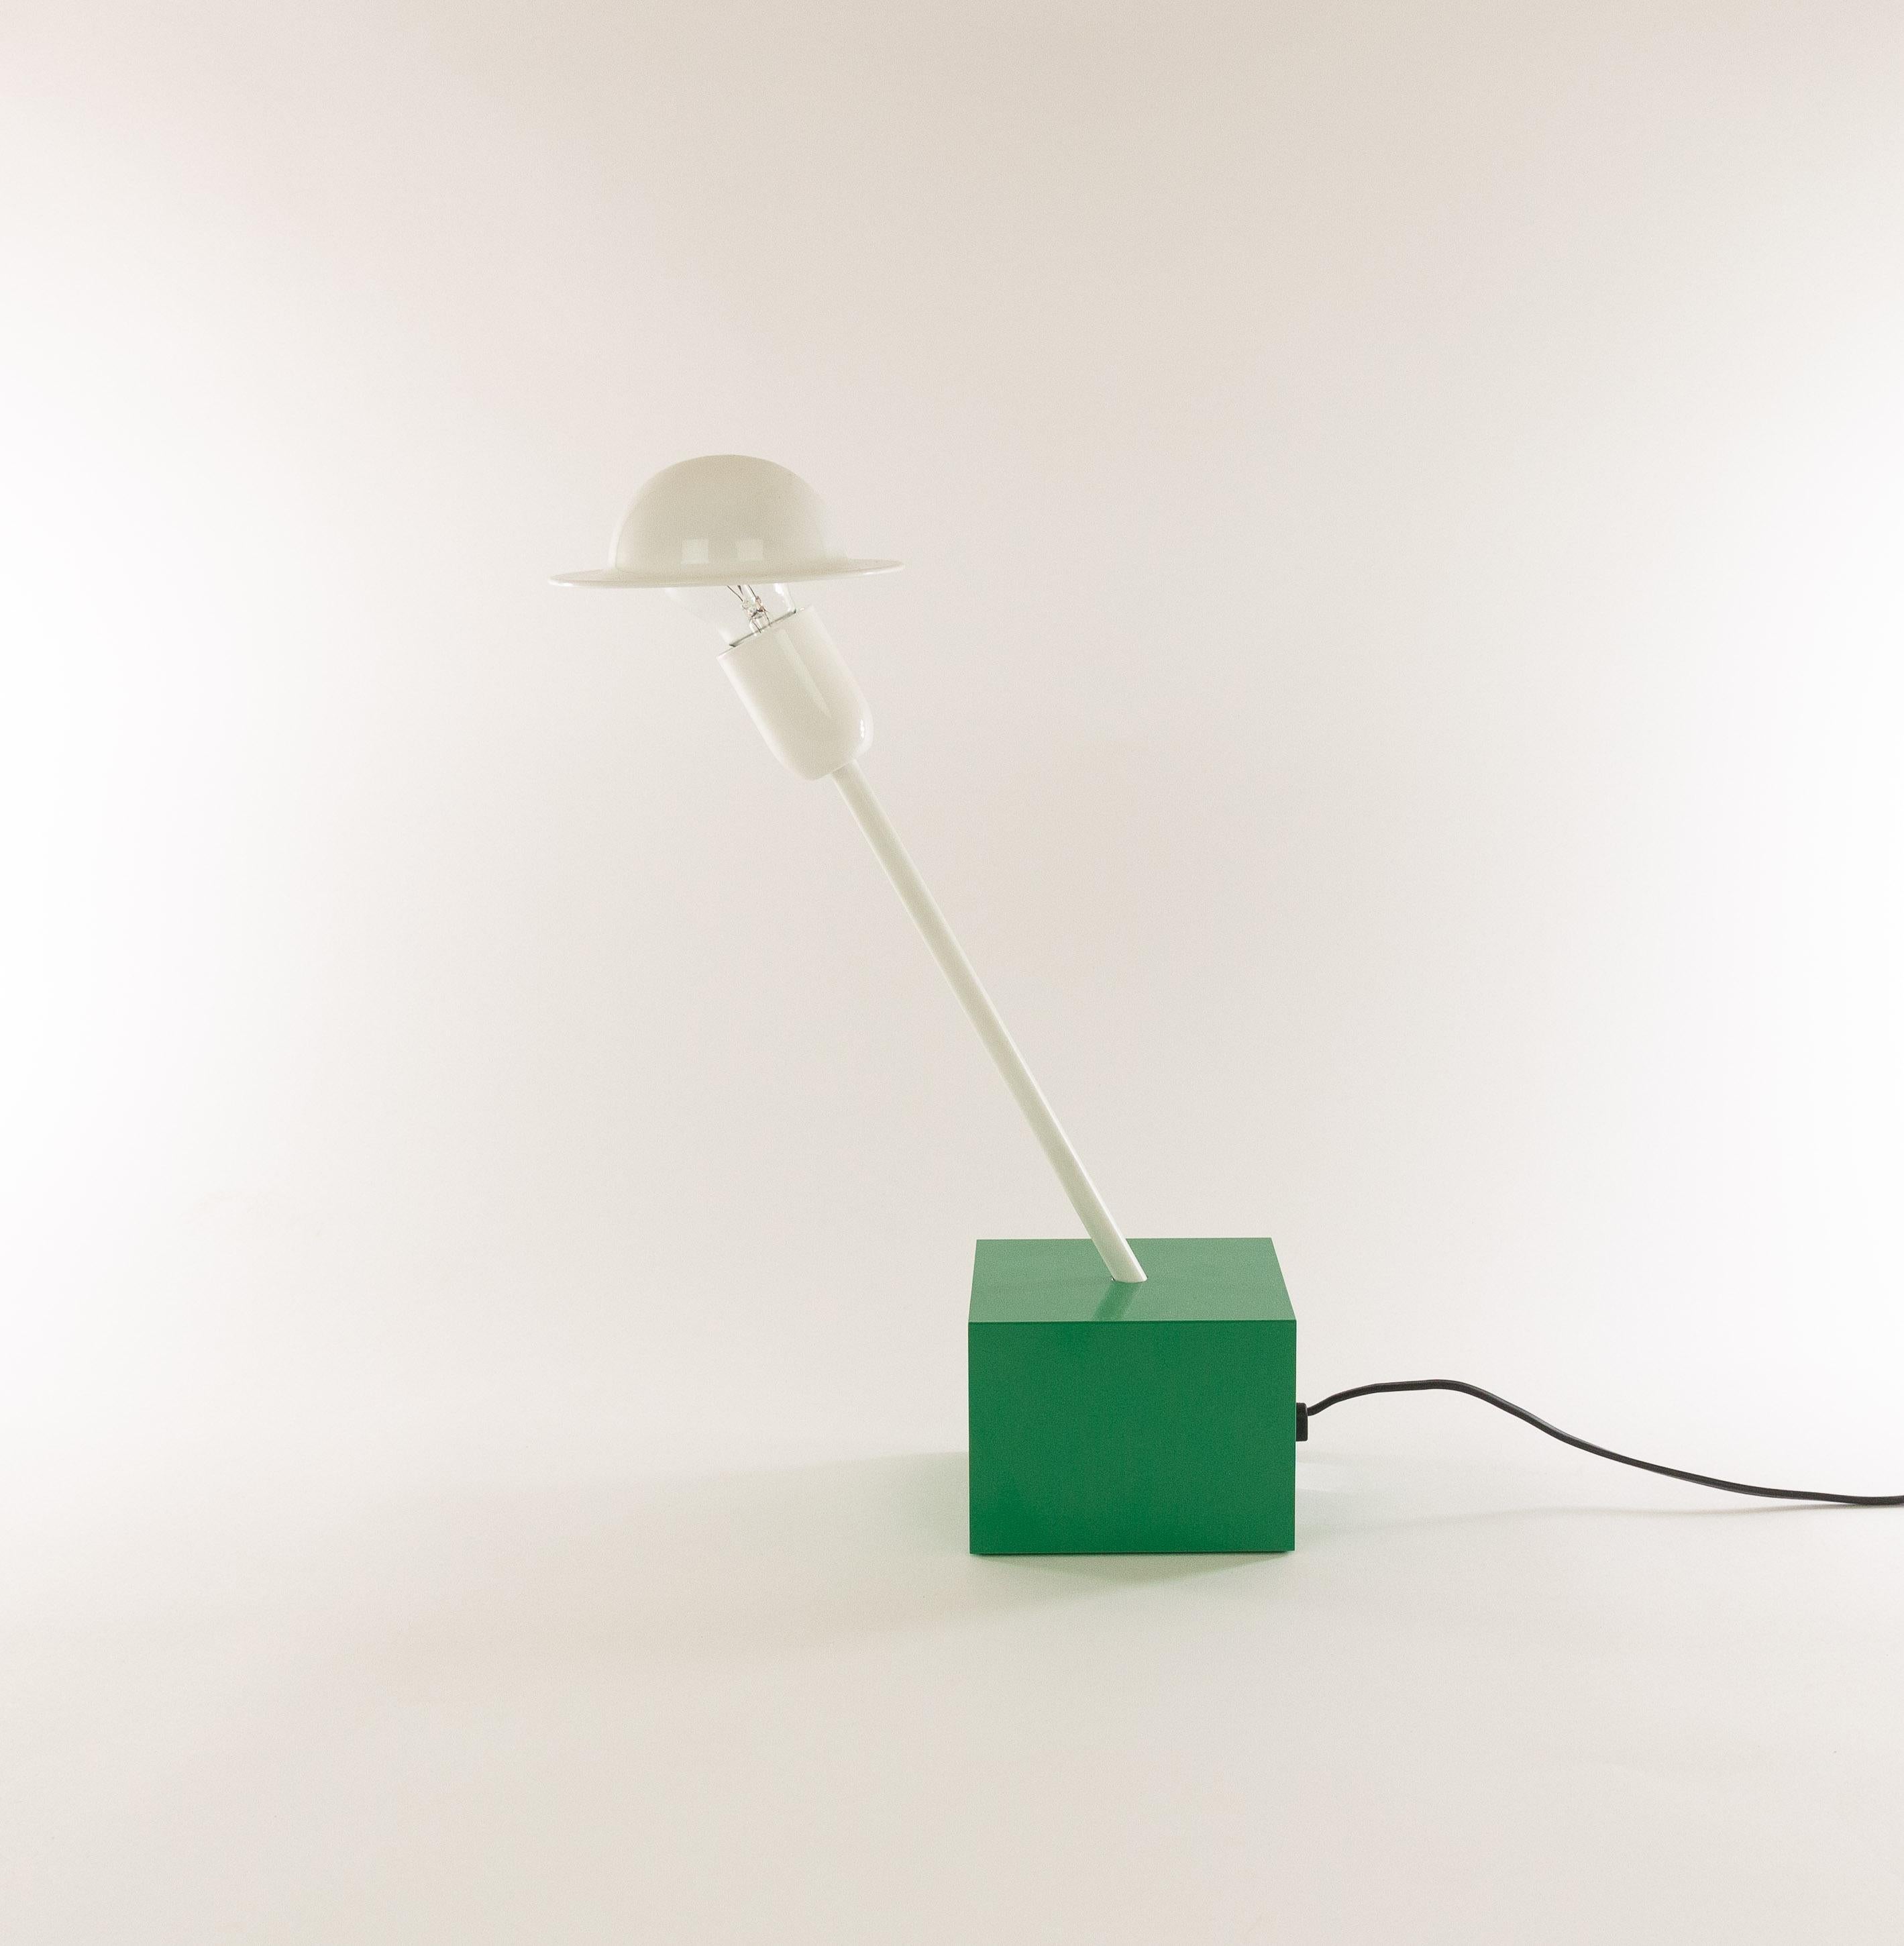 Don table lamp designed in 1977 by Ettore Sottsass and manufactured by Stilnovo.

The lamp consists of a relative heavy emerald green cubic base, a white slanted rod and a striking adjustable white shade. This shade is connected to the light bulb